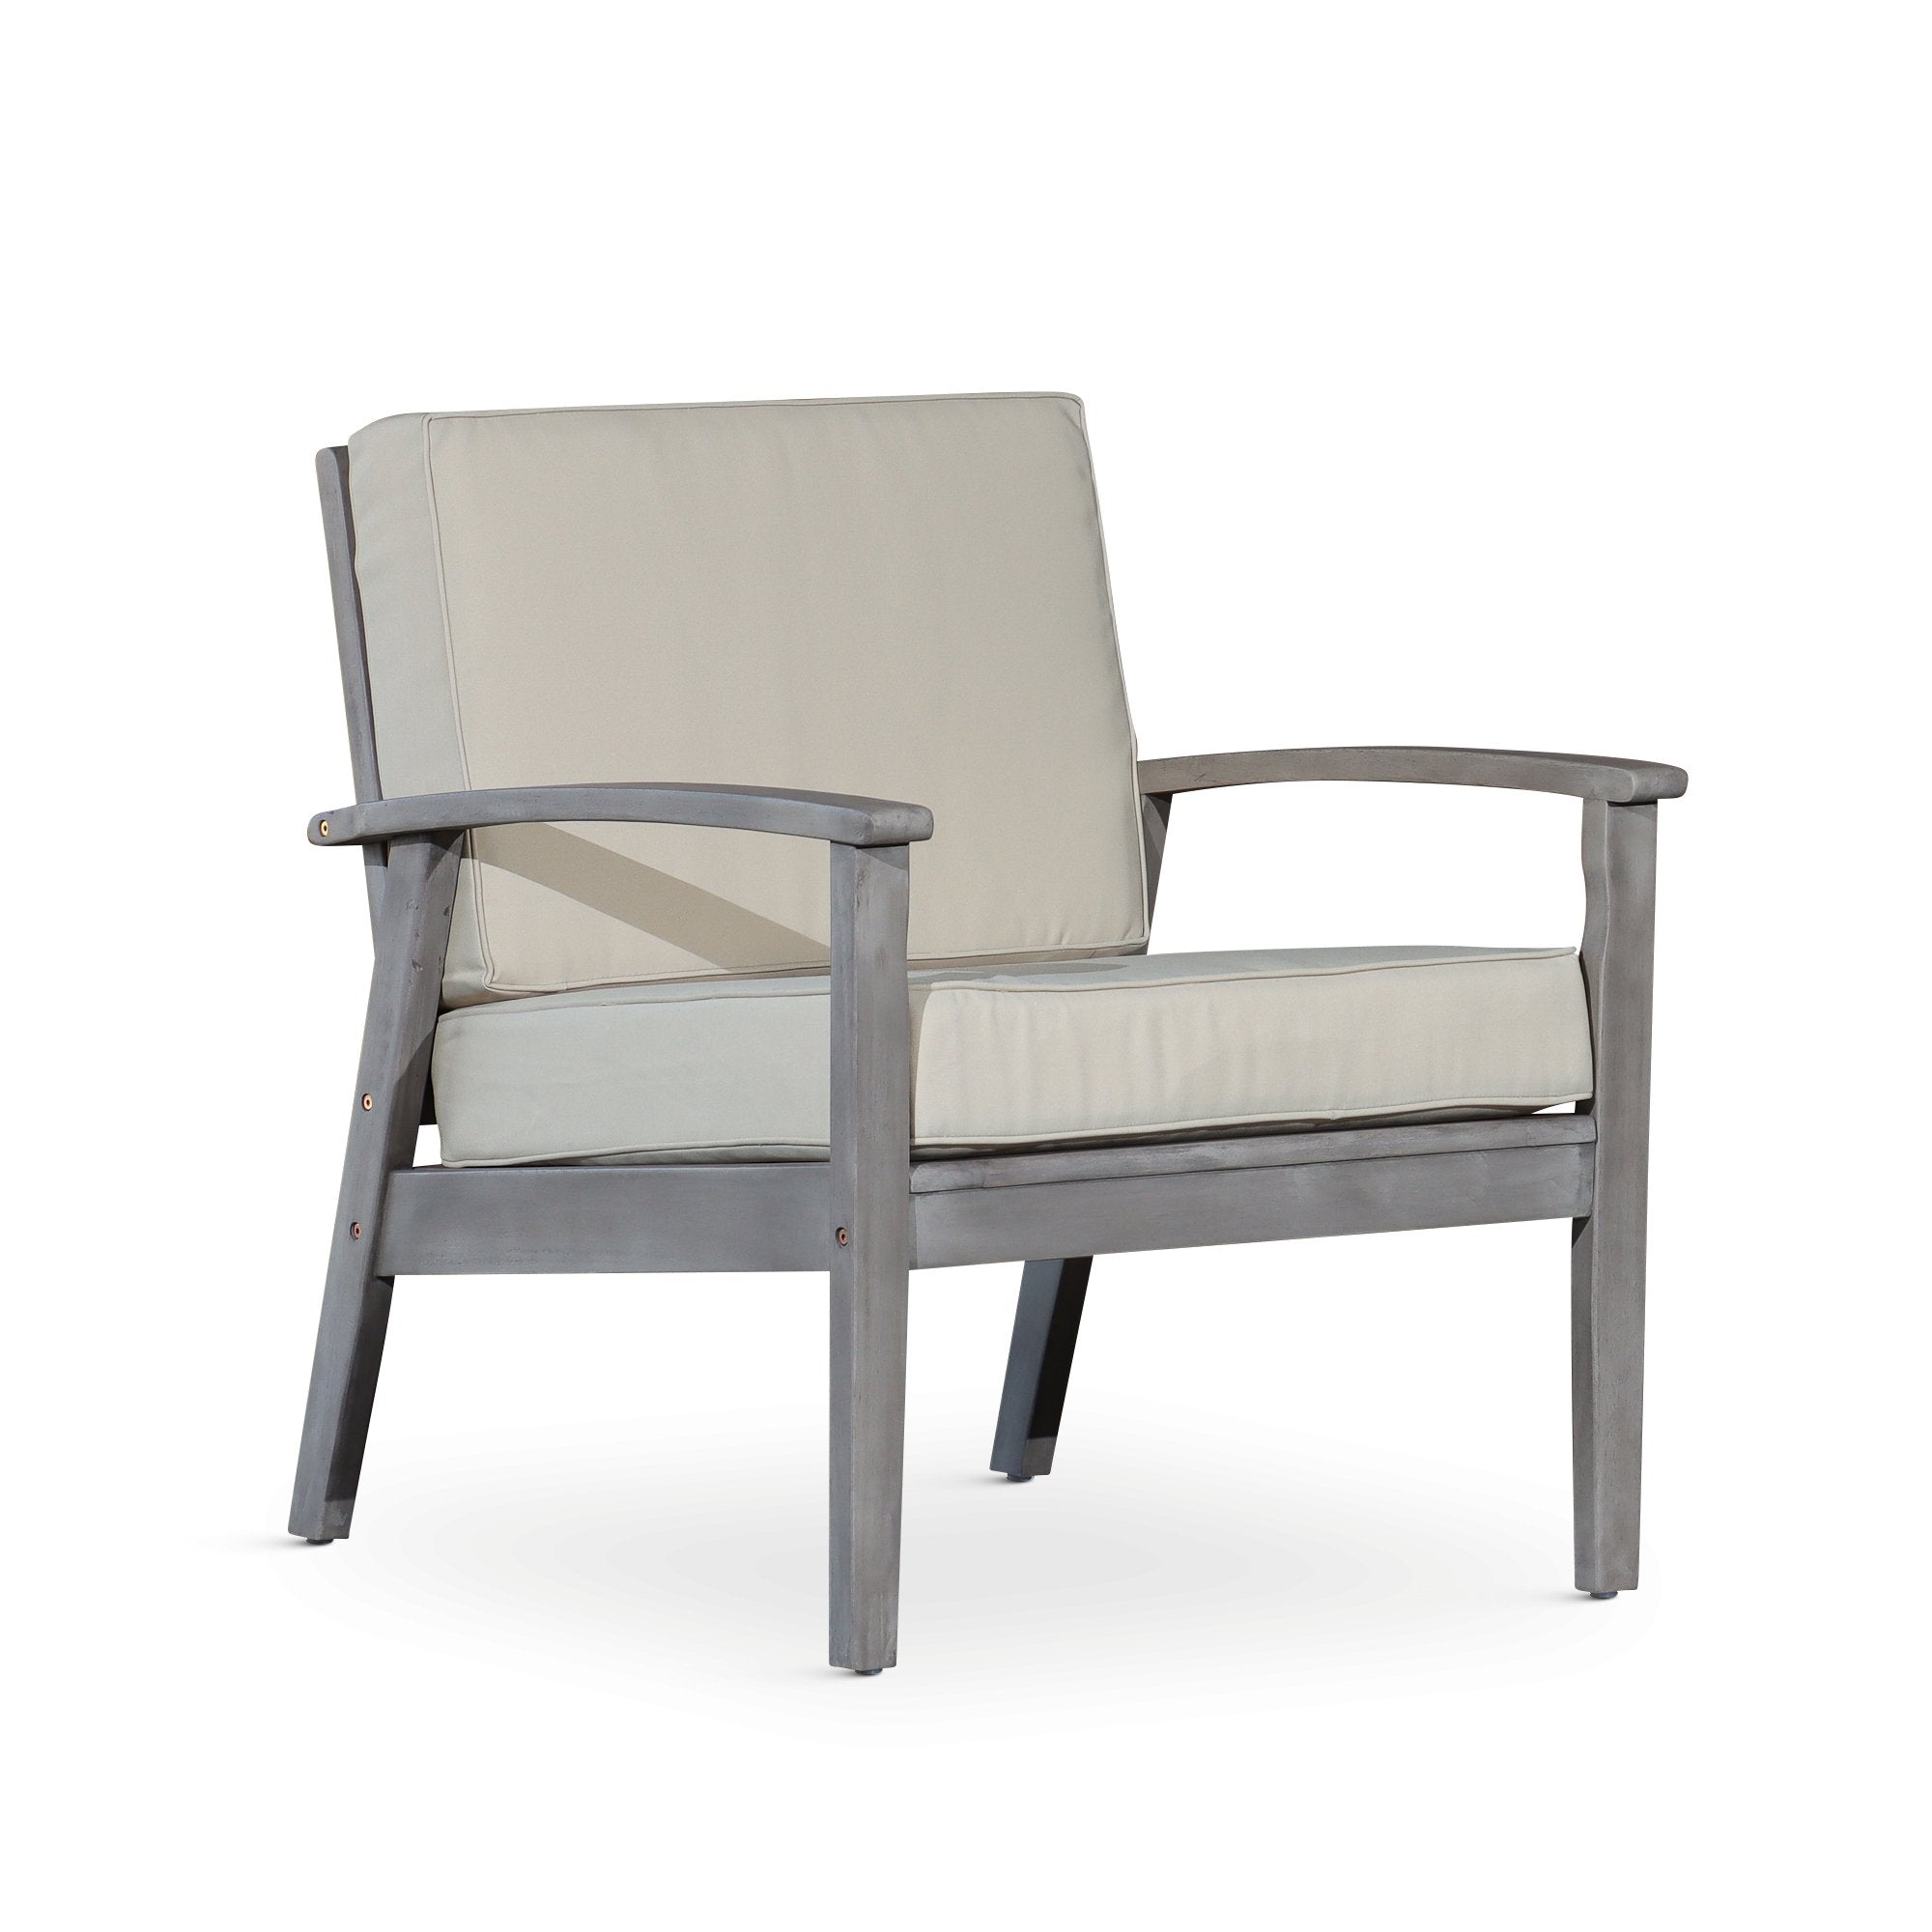 Deep-Seat-Outdoor-Chair,-Silver-Gray-Finish,-Sand-Cushions-Outdoor-Chairs